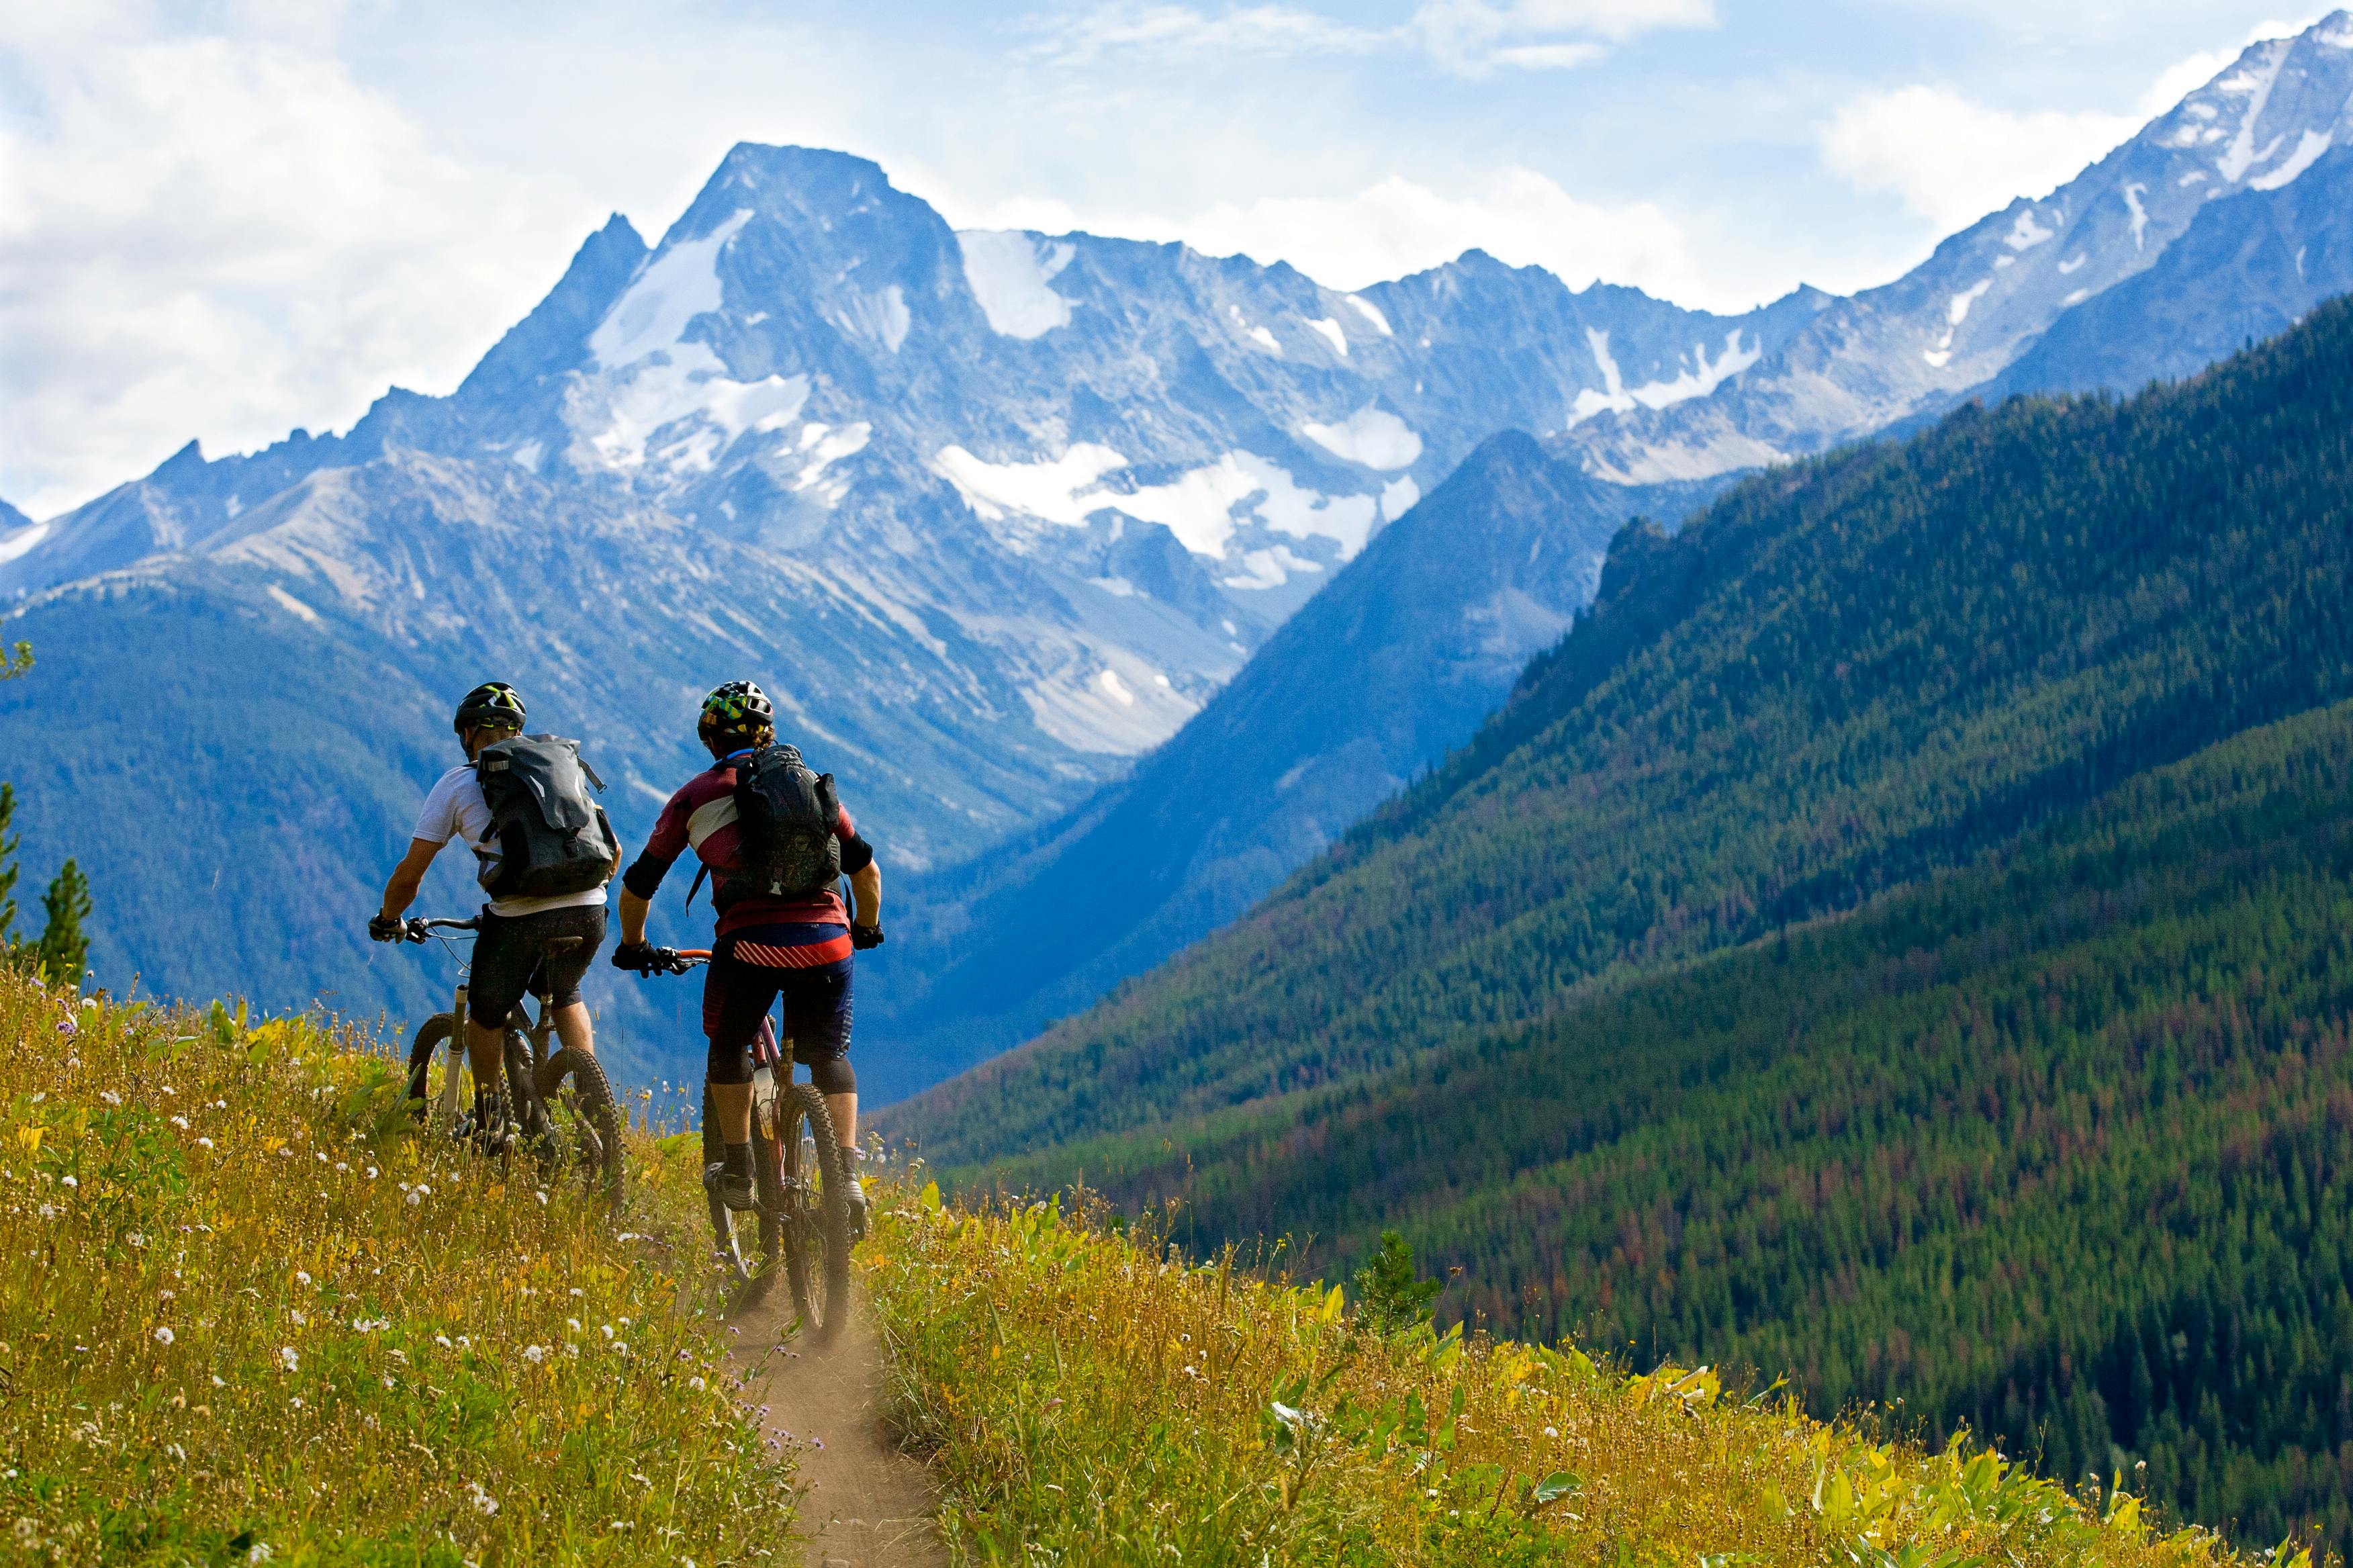 Two mountain bikers ride through a field with mountains in the distance